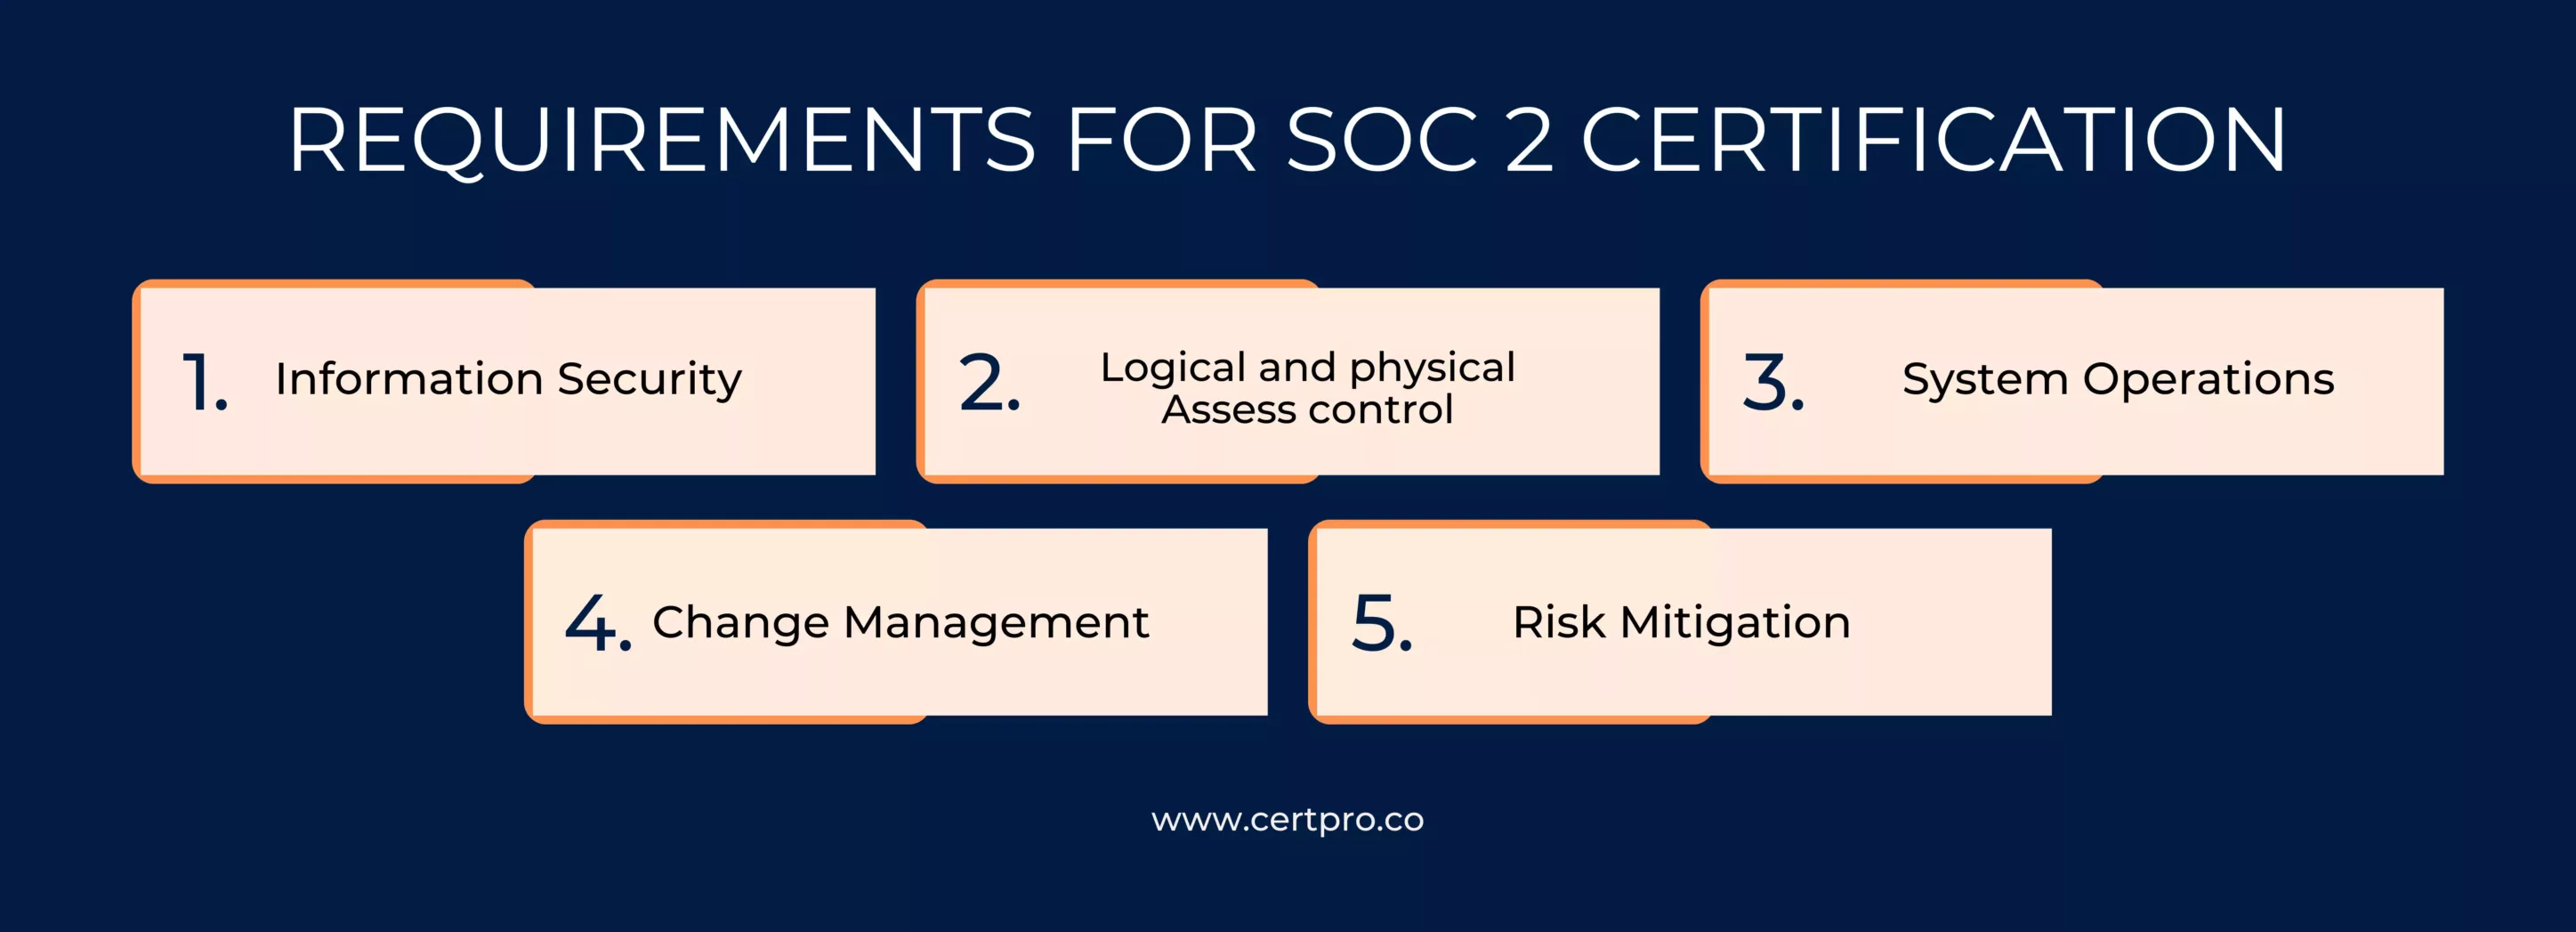 requirements for SOC 2 certification